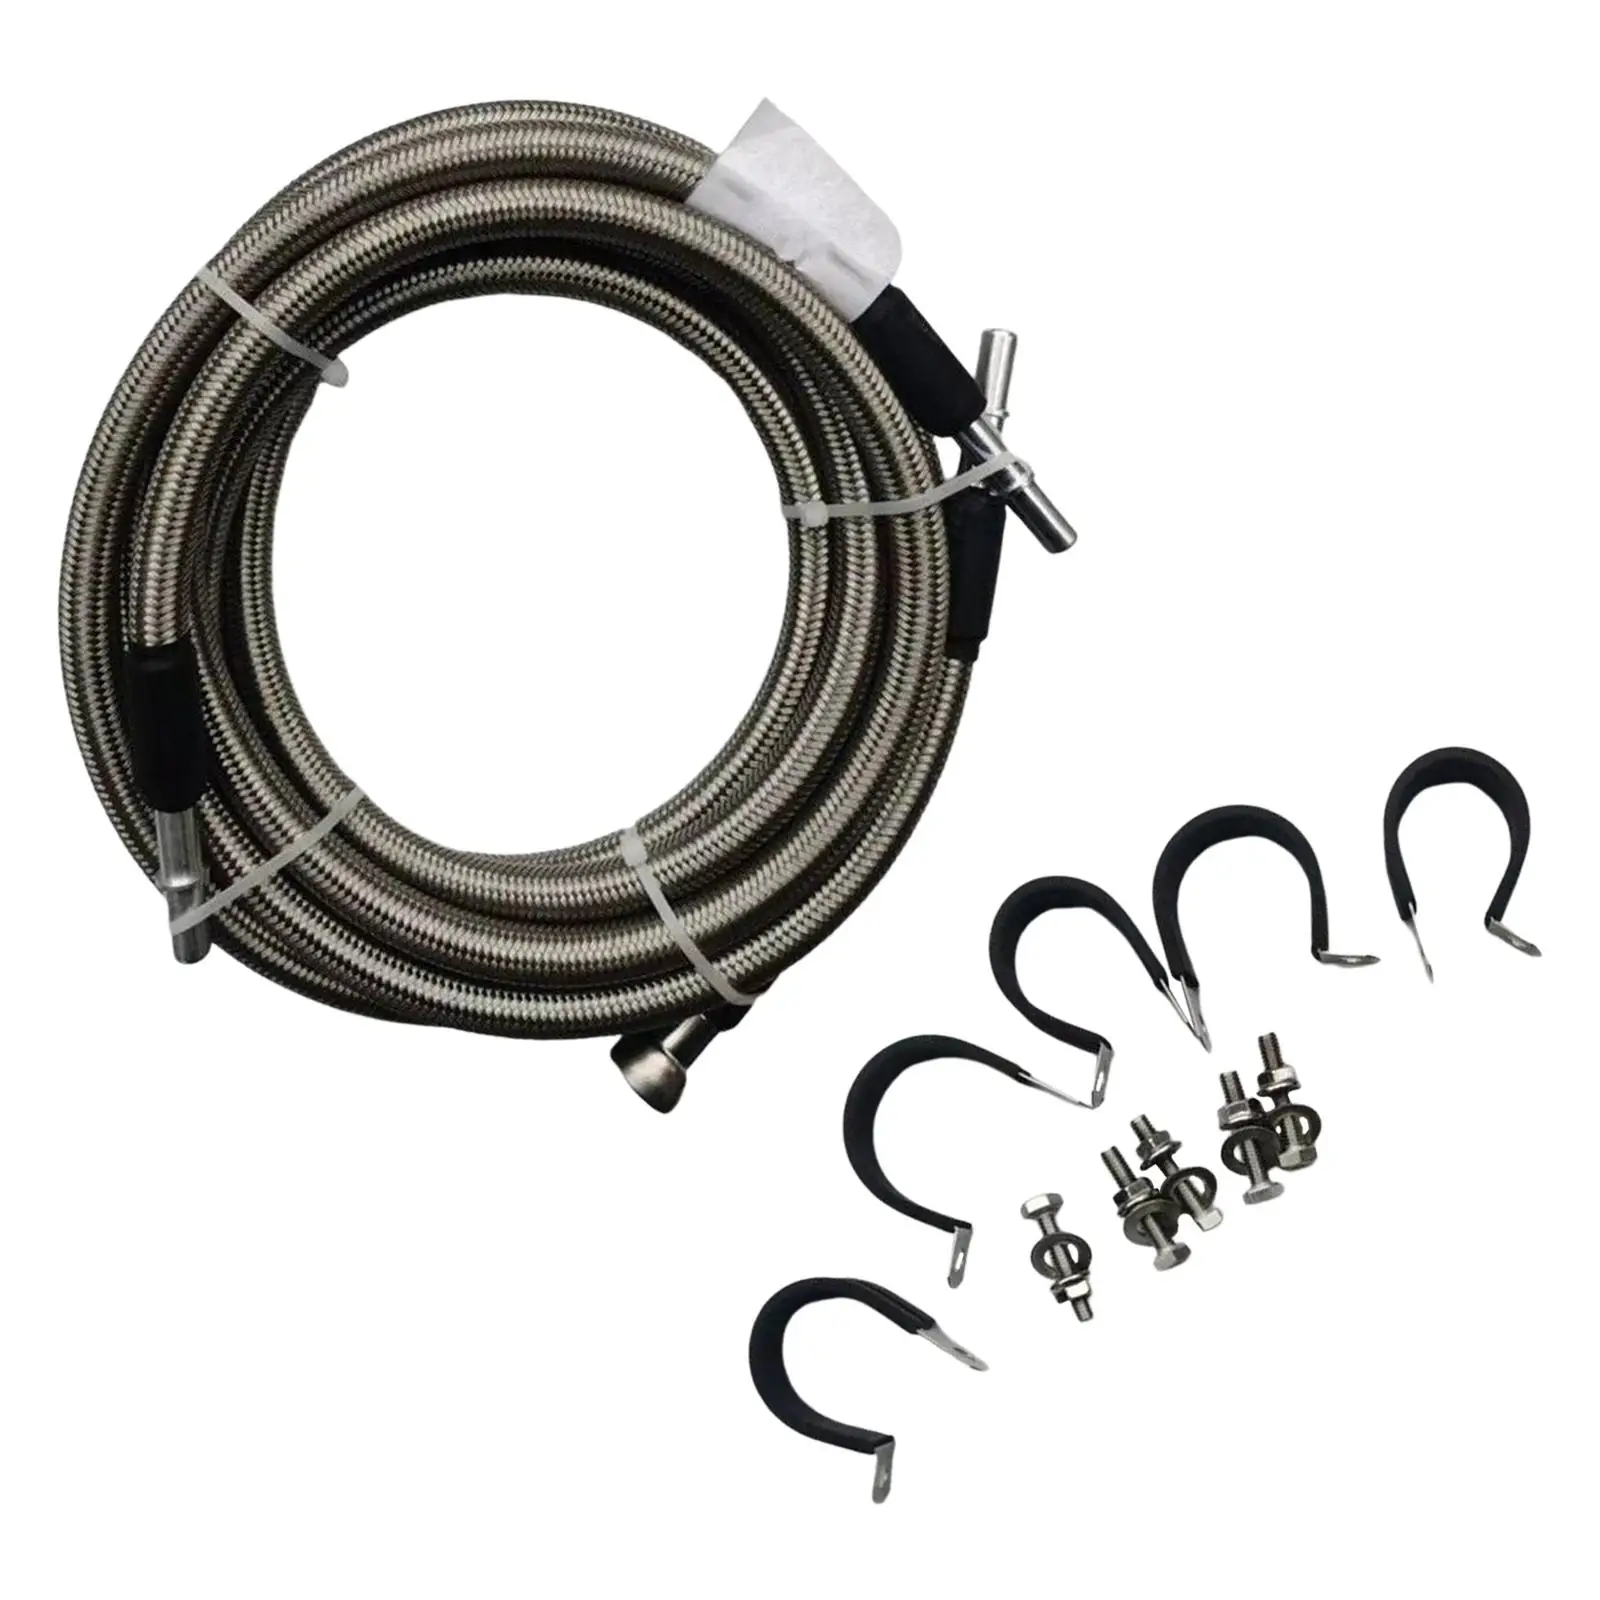 

Braided Fuel Line Kits with Nuts Easy to Use Automotive Engine Accessories Fuel Pipe Fuel Hose with Clamp for Tractors